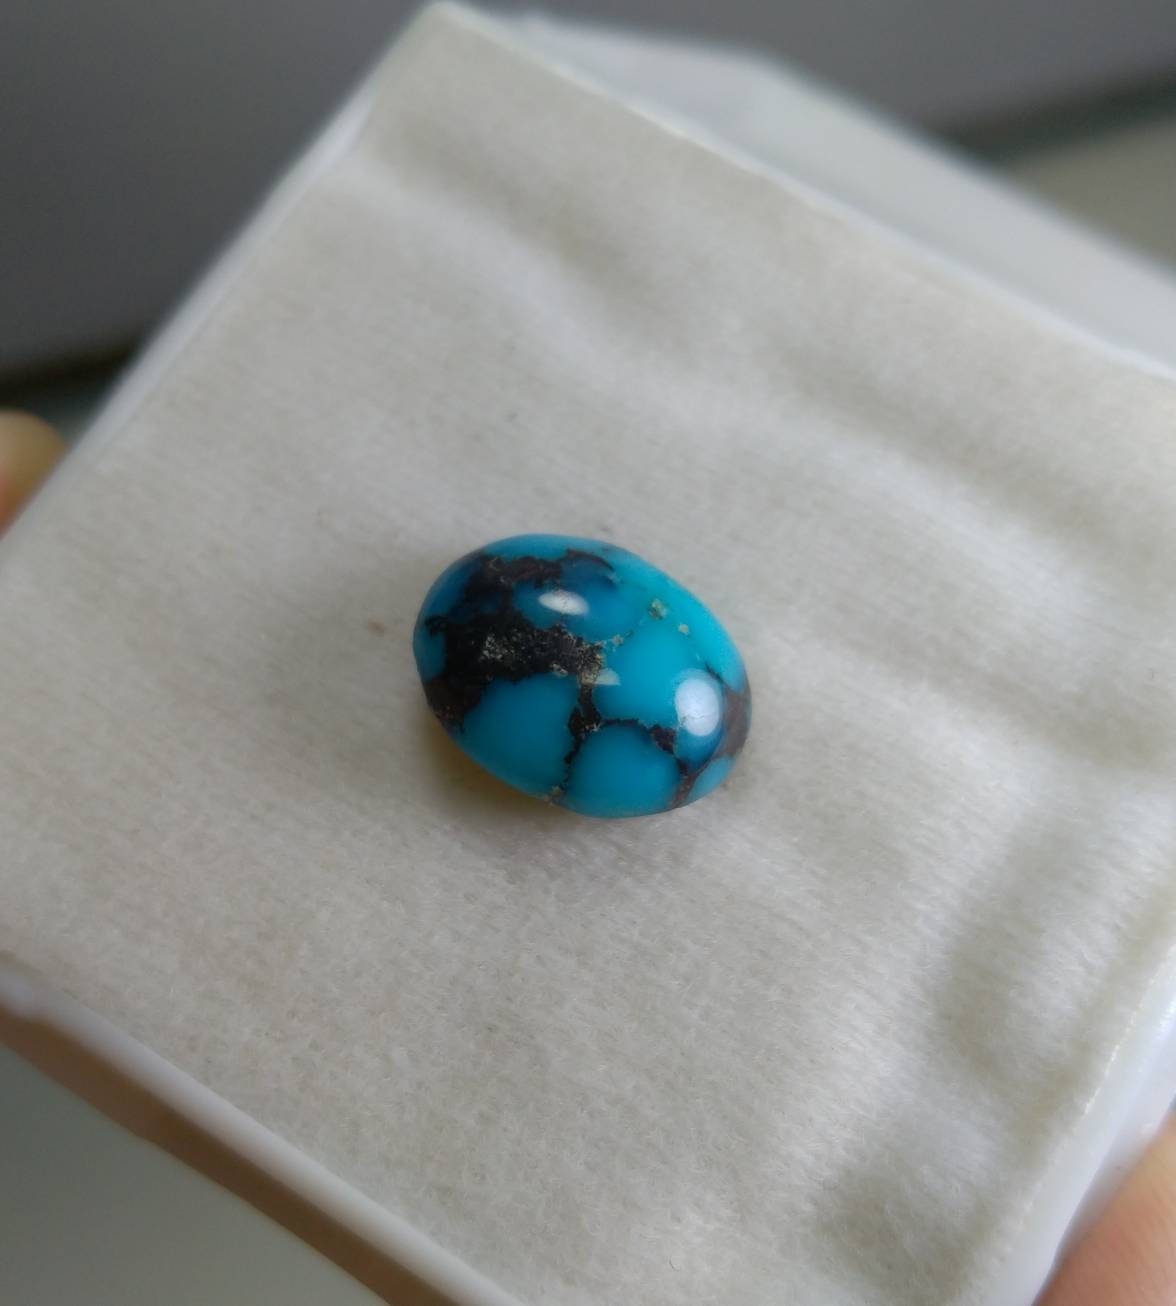 ARSAA GEMS AND MINERALSNatural fine quality beautiful 10 carats stabilized oval shape kingman web turquoise cabochon - Premium  from ARSAA GEMS AND MINERALS - Just $20.00! Shop now at ARSAA GEMS AND MINERALS